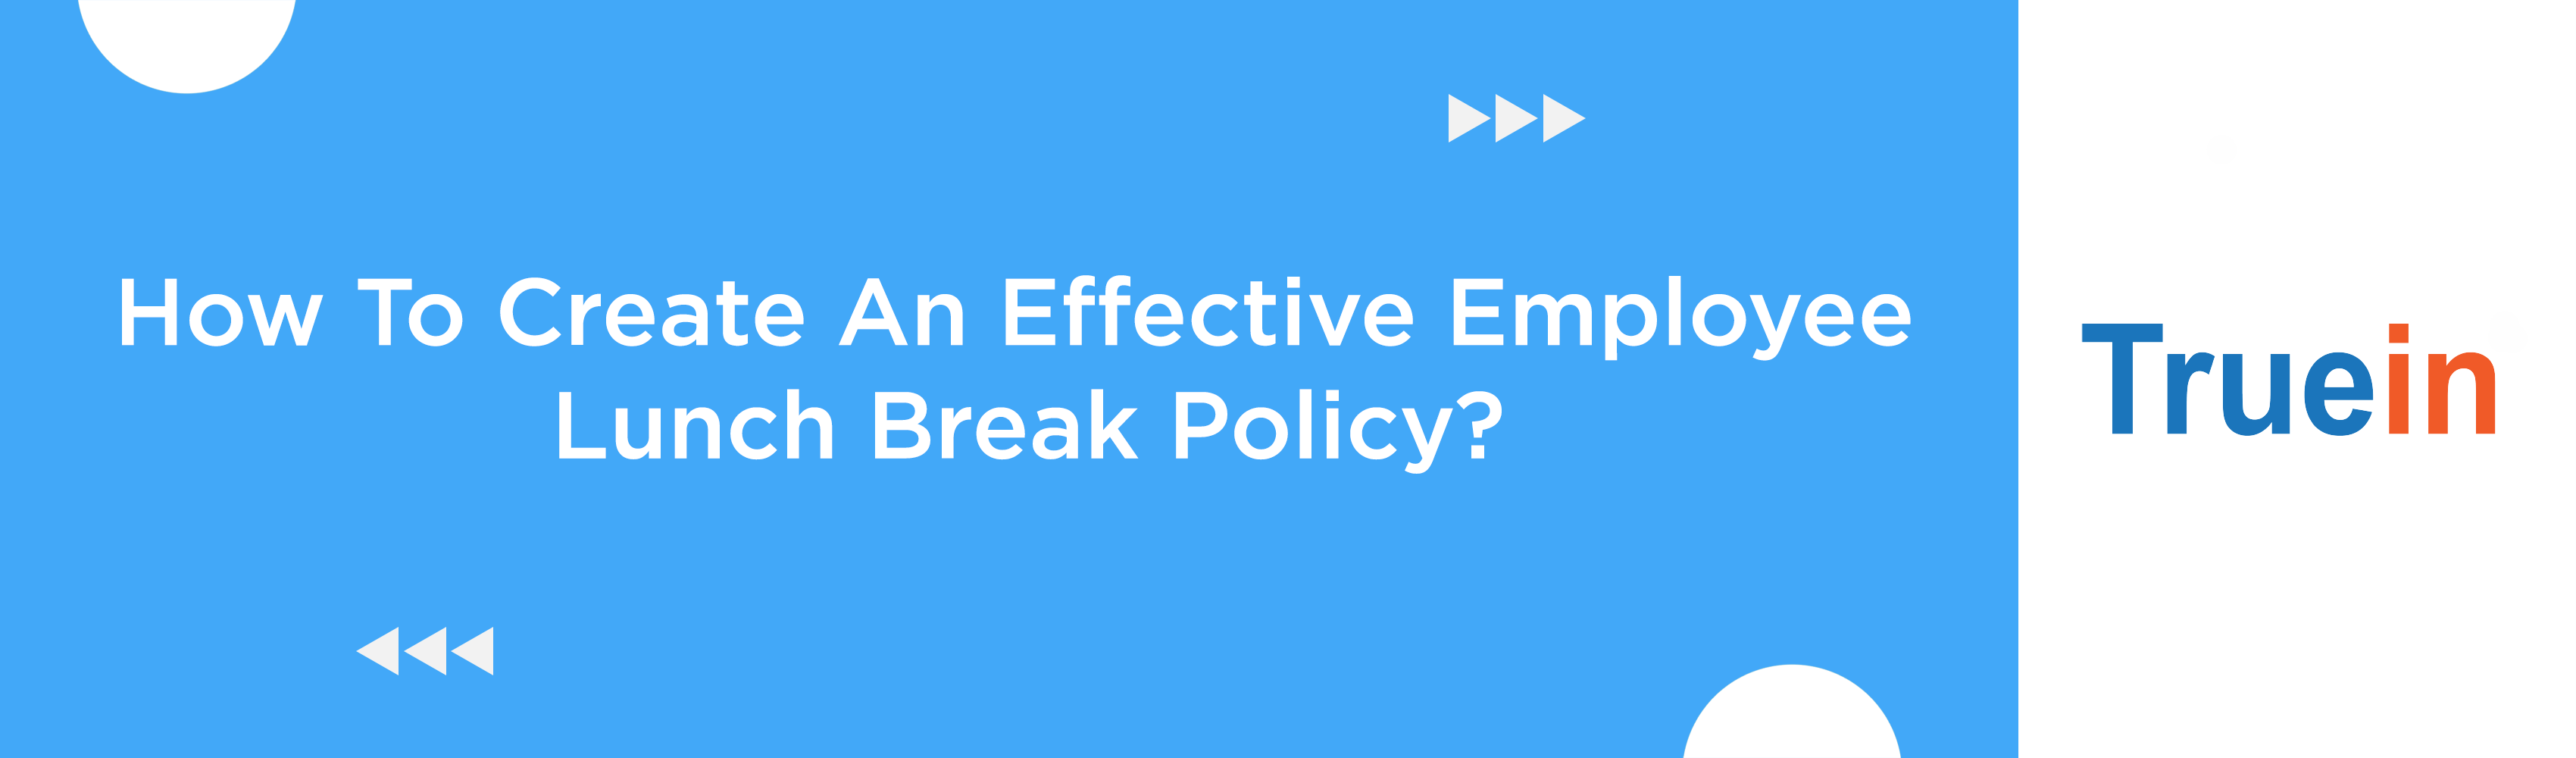 How To Create An Effective Employee Lunch Break Policy?